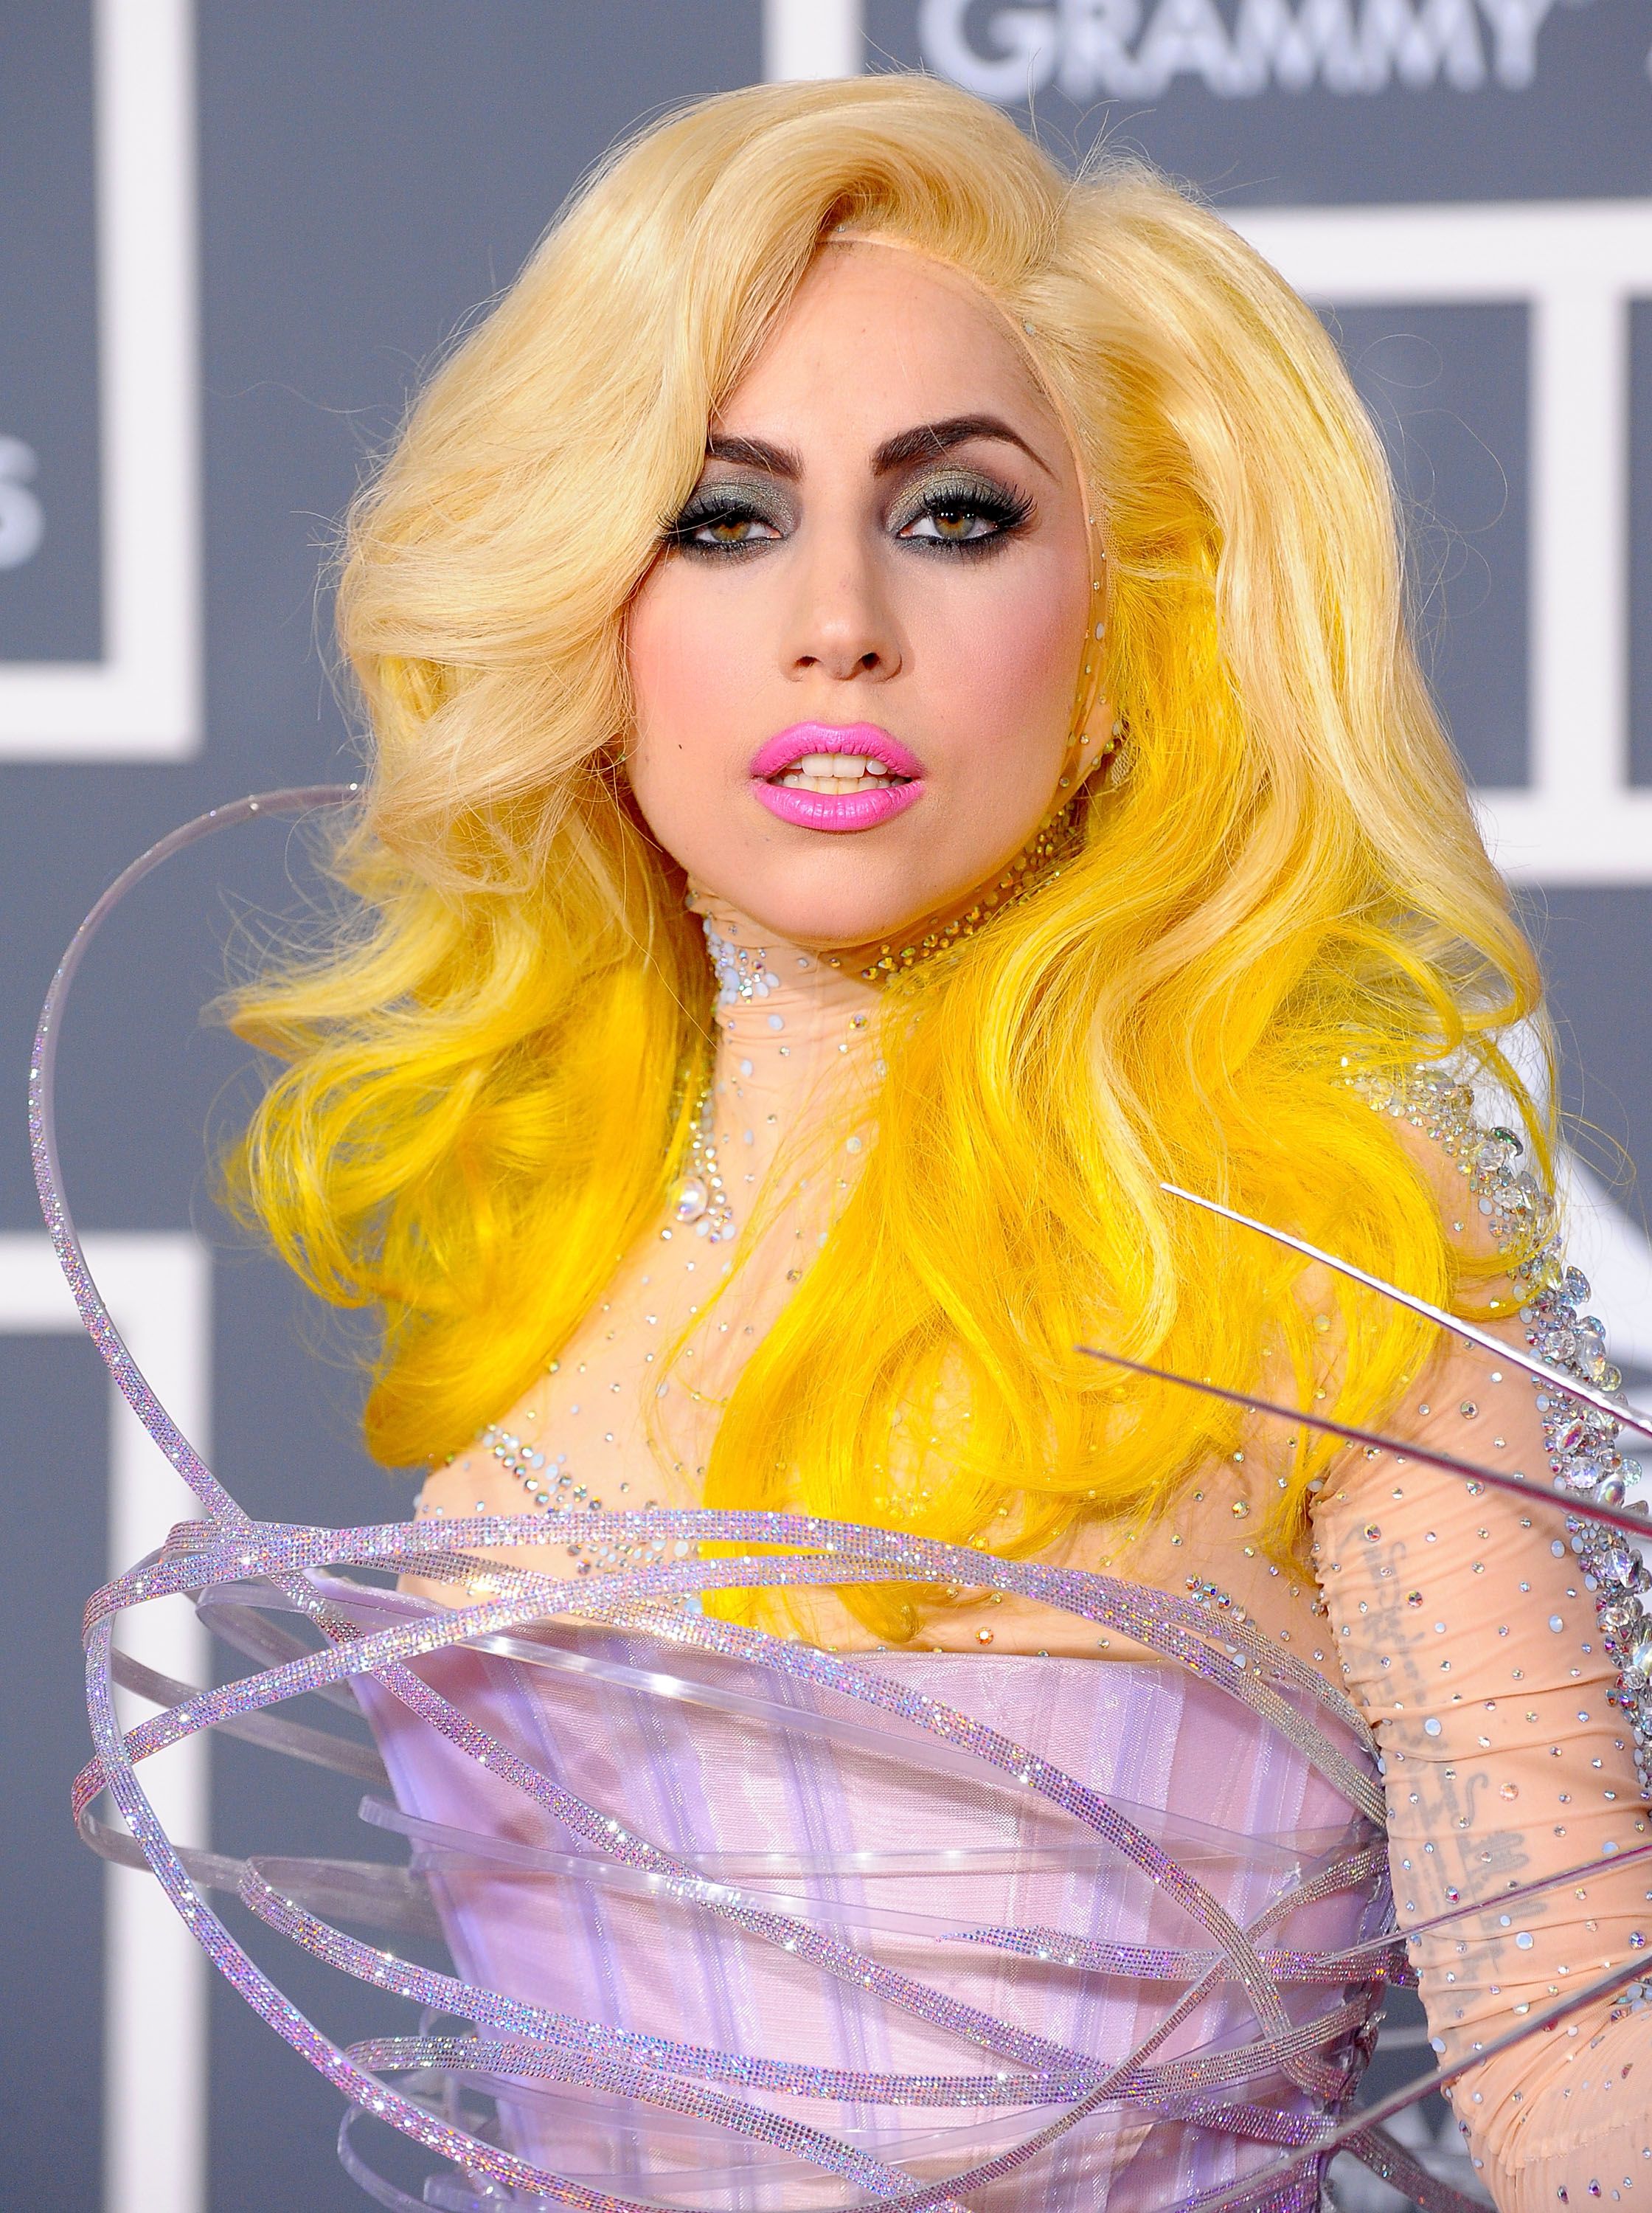 musician-lady-gaga-arrives-at-the-52nd-annual-grammy-awards-news-photo-96304424-1552058474.jpg